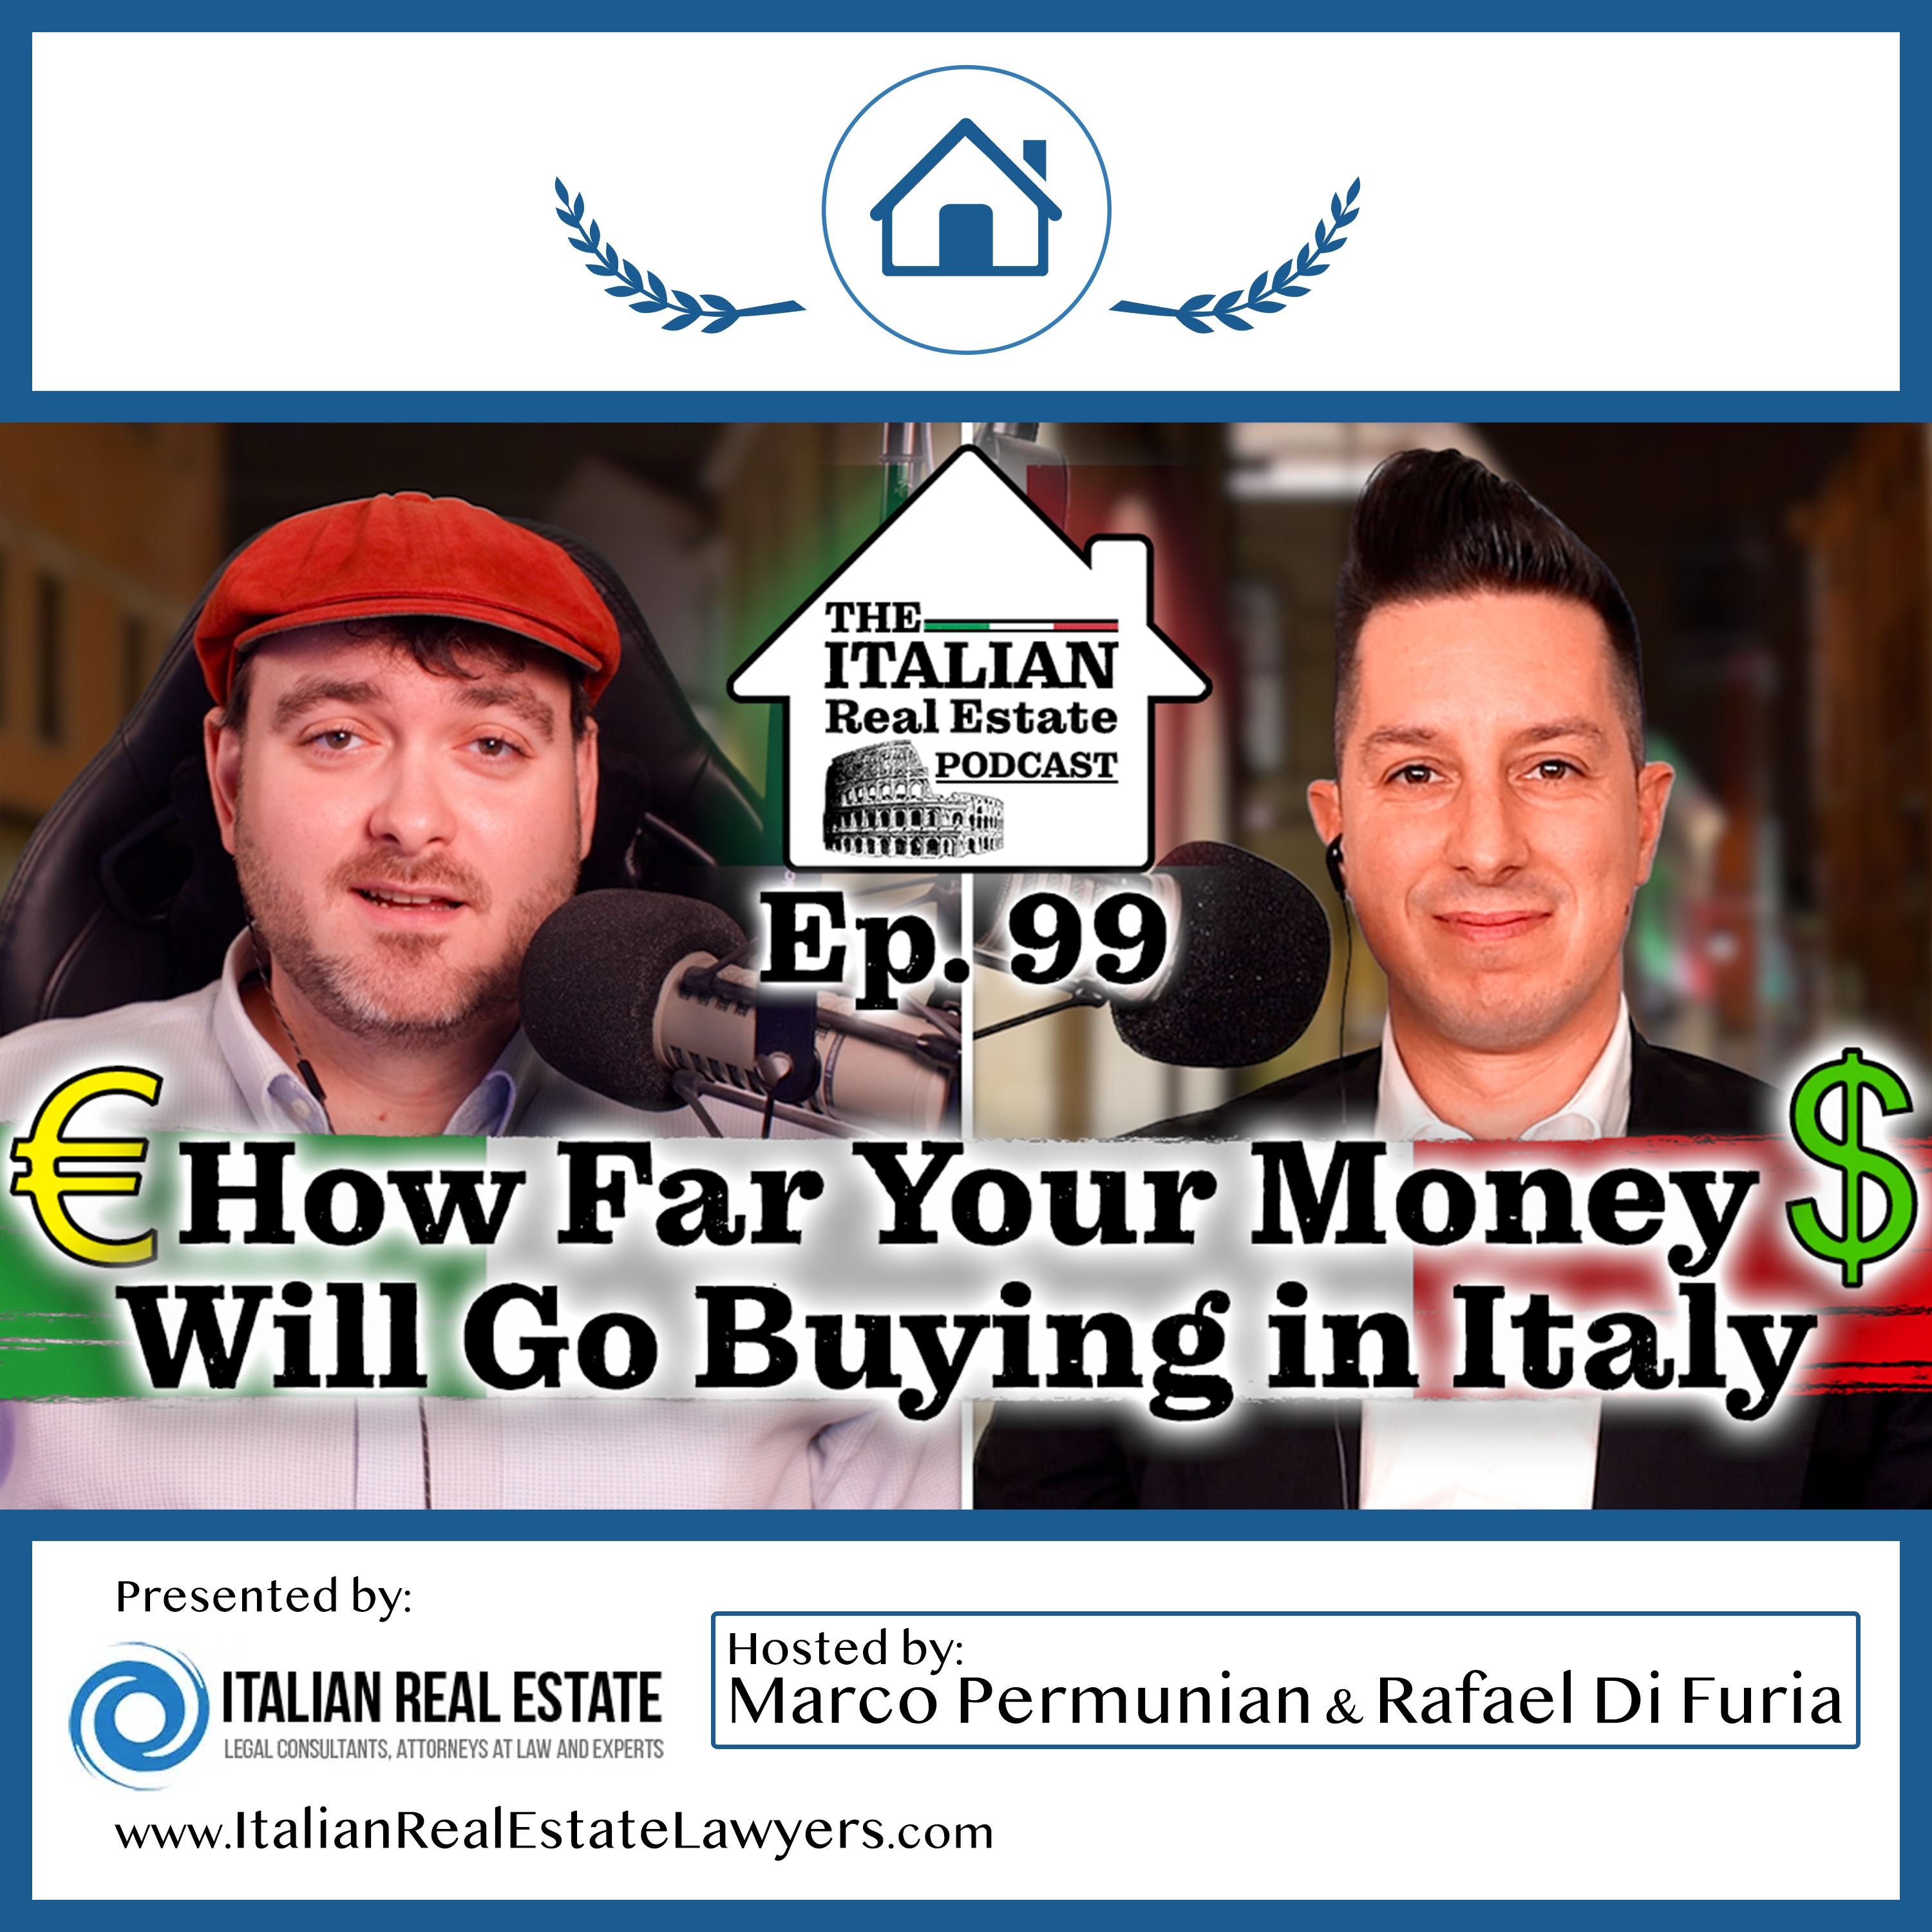 How Far Your Money Will Go When Buying Property in Italy